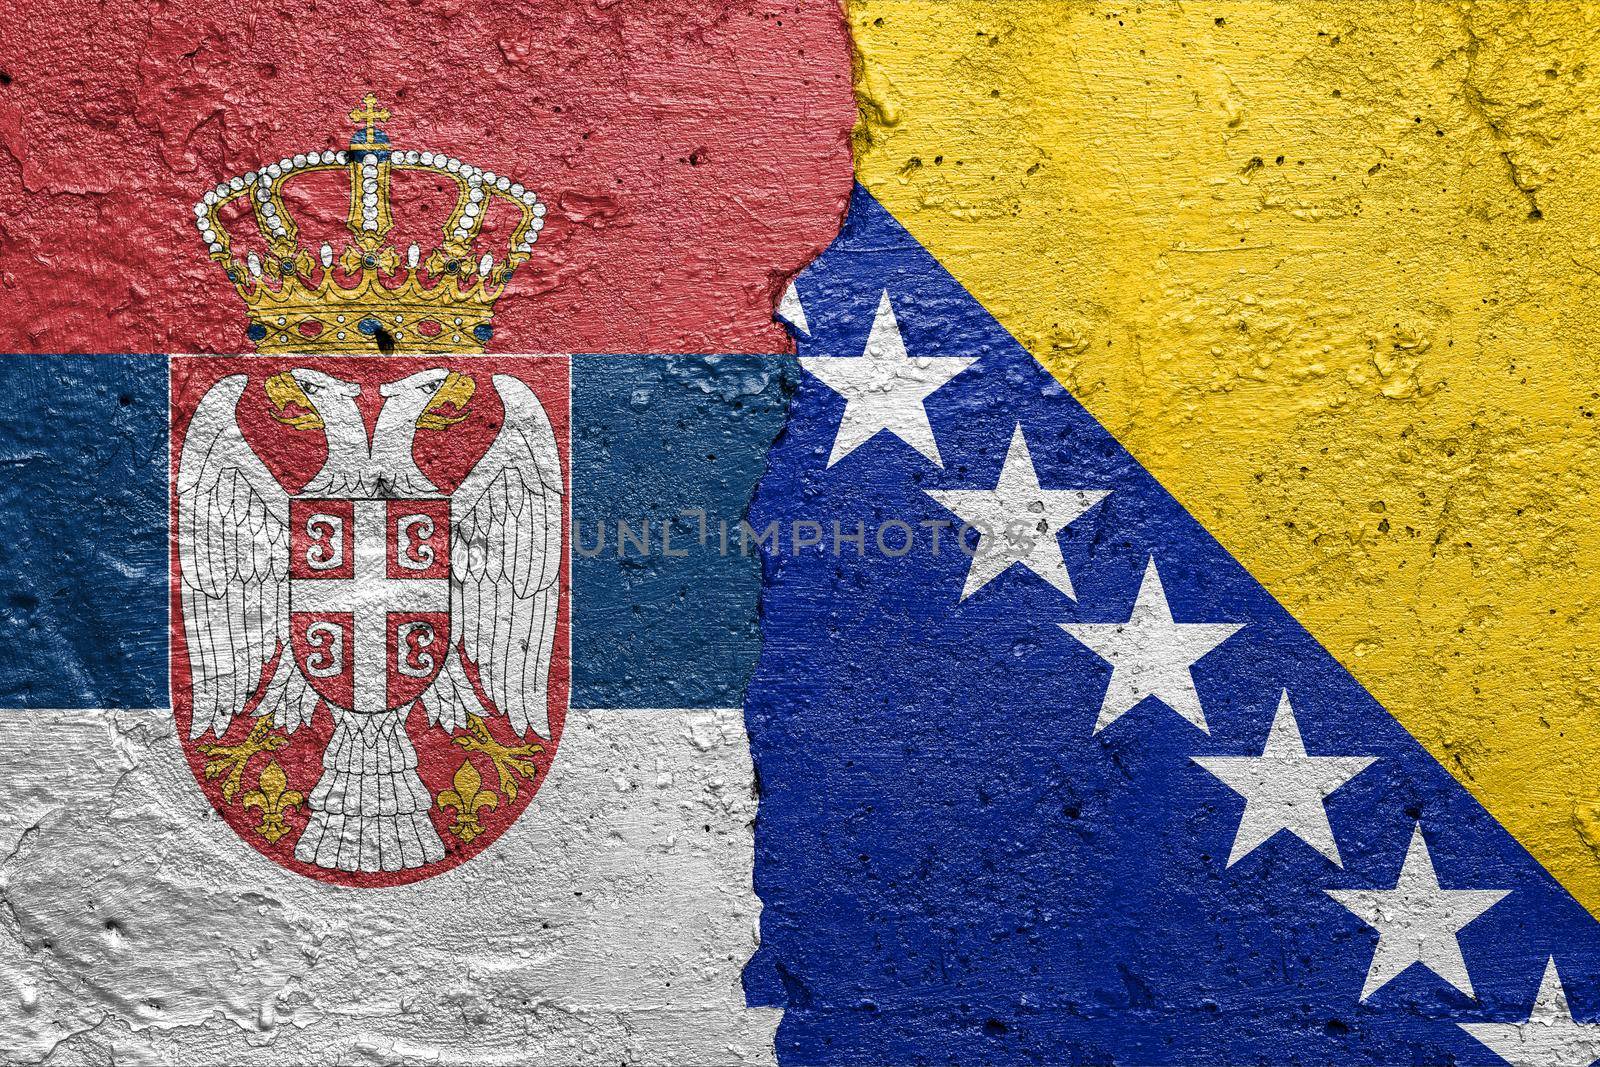 Serbia and Bosnia and Hercegovina - Cracked concrete wall painted with a Serbian flag on the left and a Bosnian flag on the right stock photo by adamr